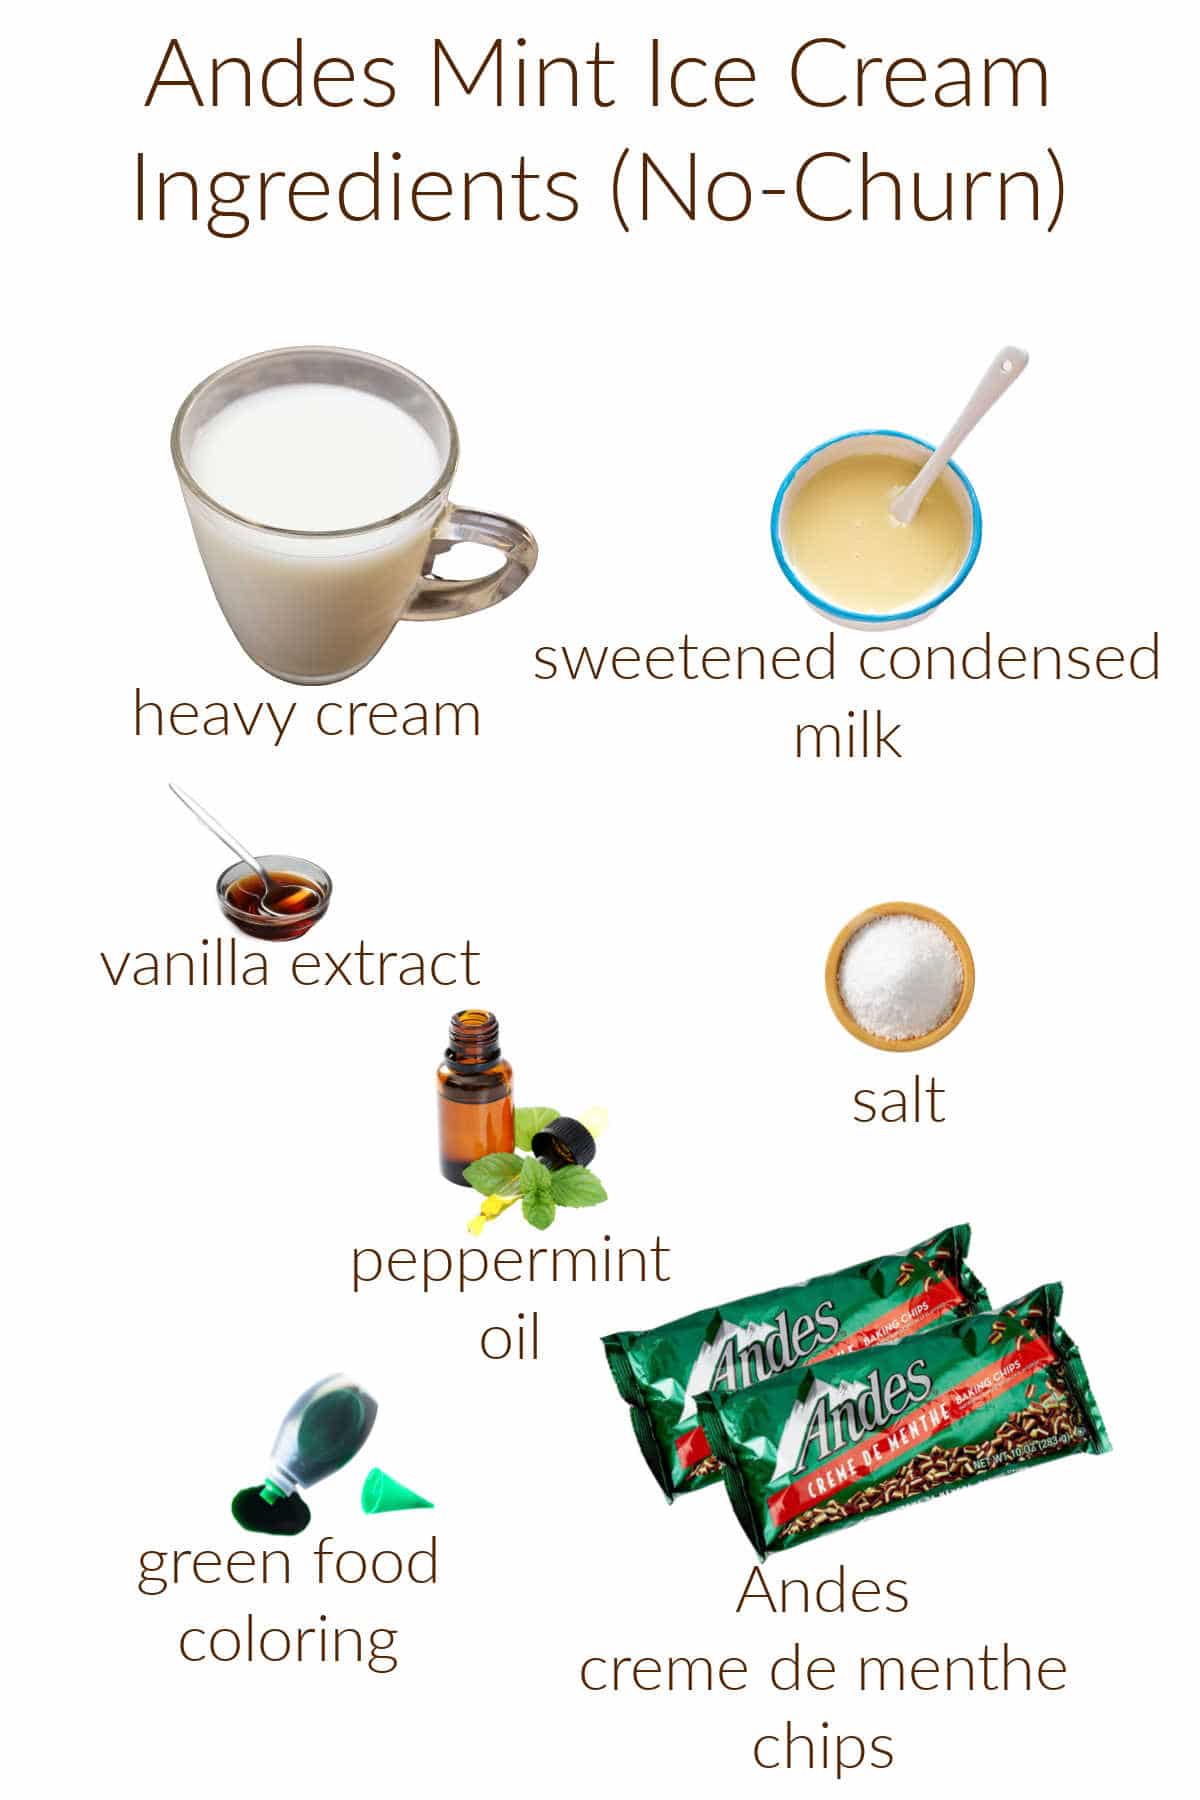 Photo collage of ingredients needed to make Andes creme de menthe ice cream.